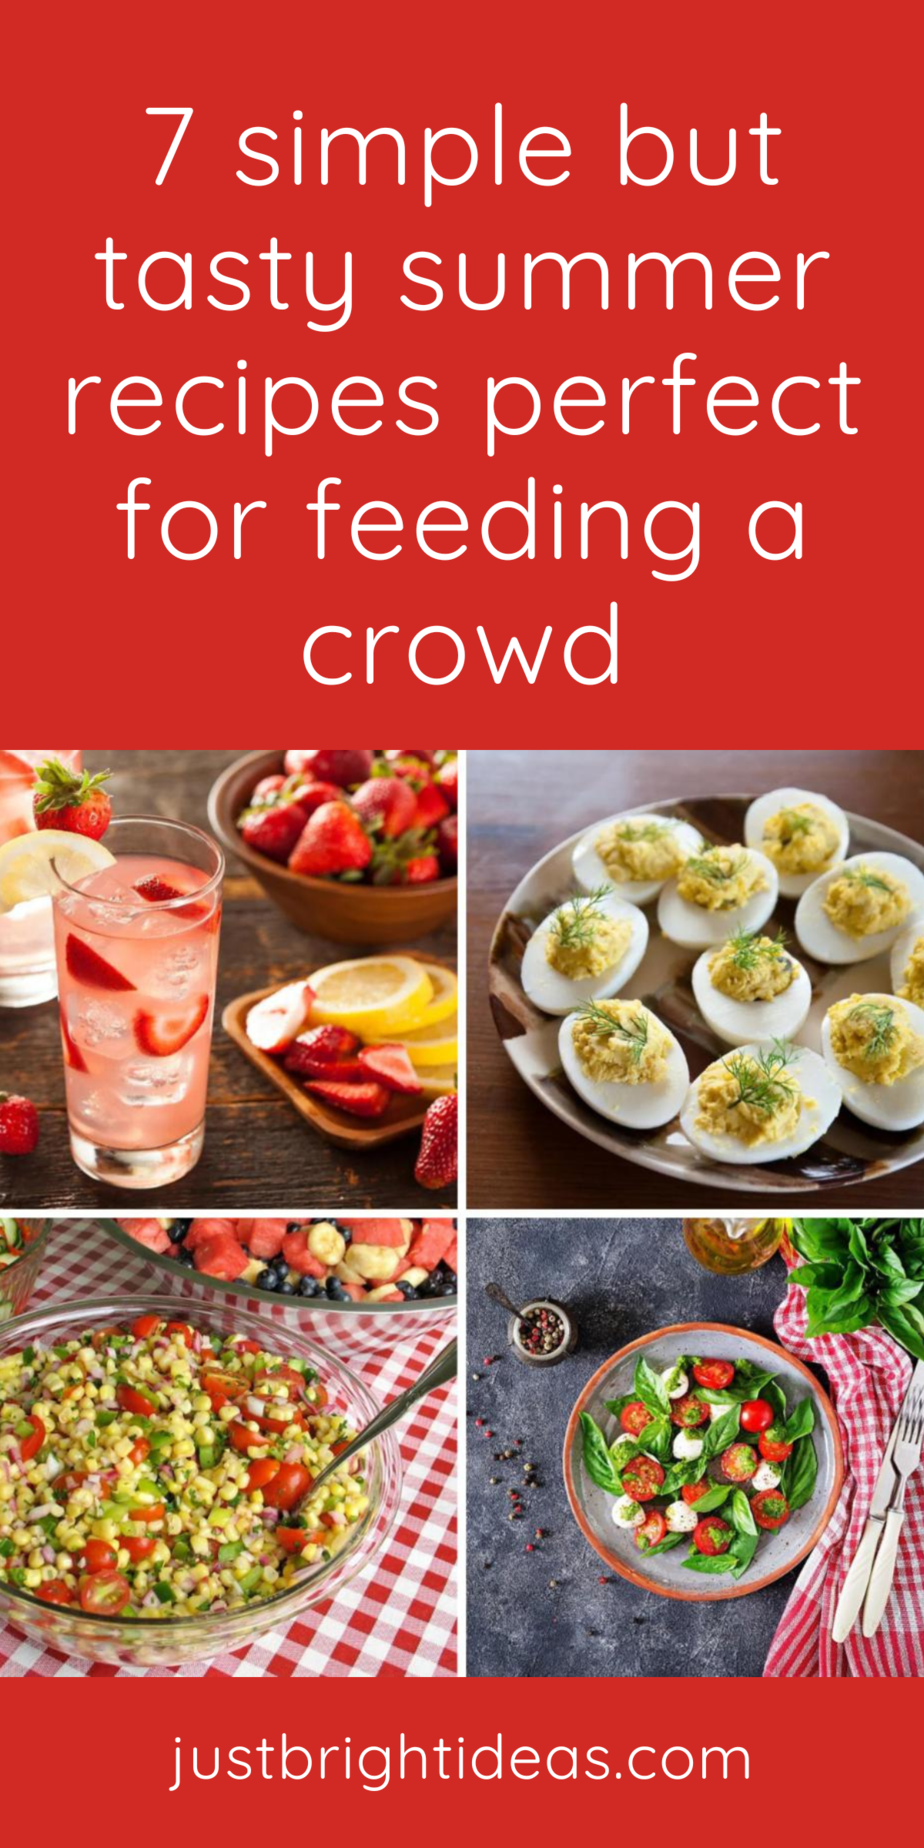 🌿🍉 Planning a picnic or outdoor bash? Check out these 7 easy and delicious recipes that are perfect for feeding a crowd! From fresh salads to sweet treats, your guests will be raving about the food. 🥙🍡🍋